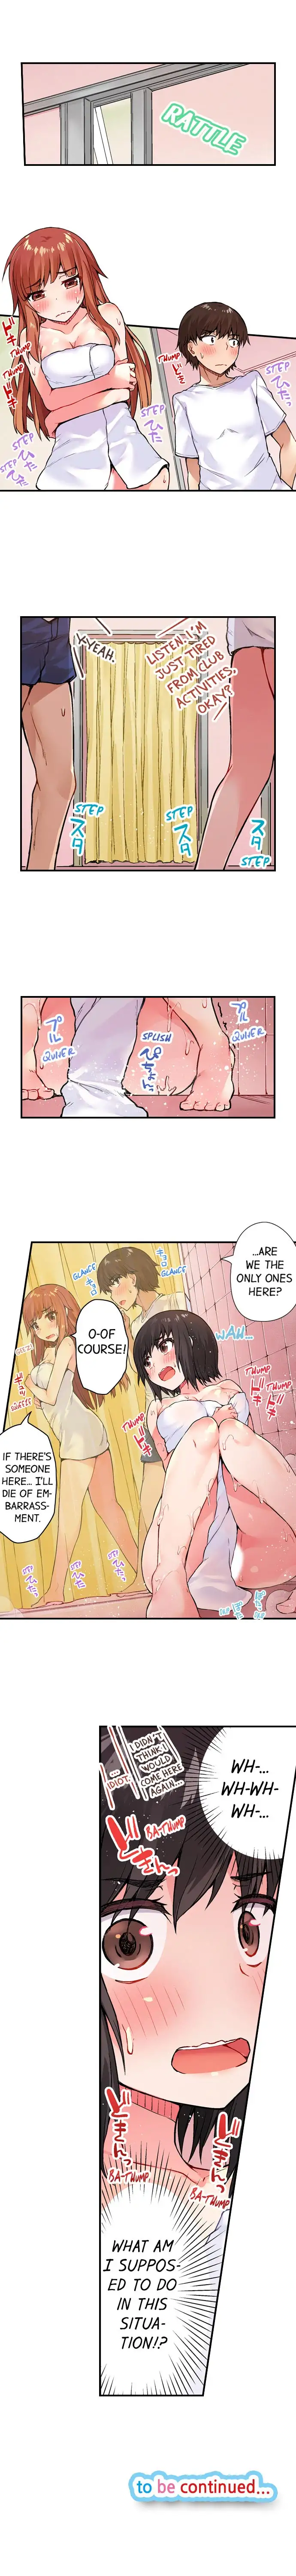 Traditional Job of Washing Girls’ Body - Chapter 26 Page 9